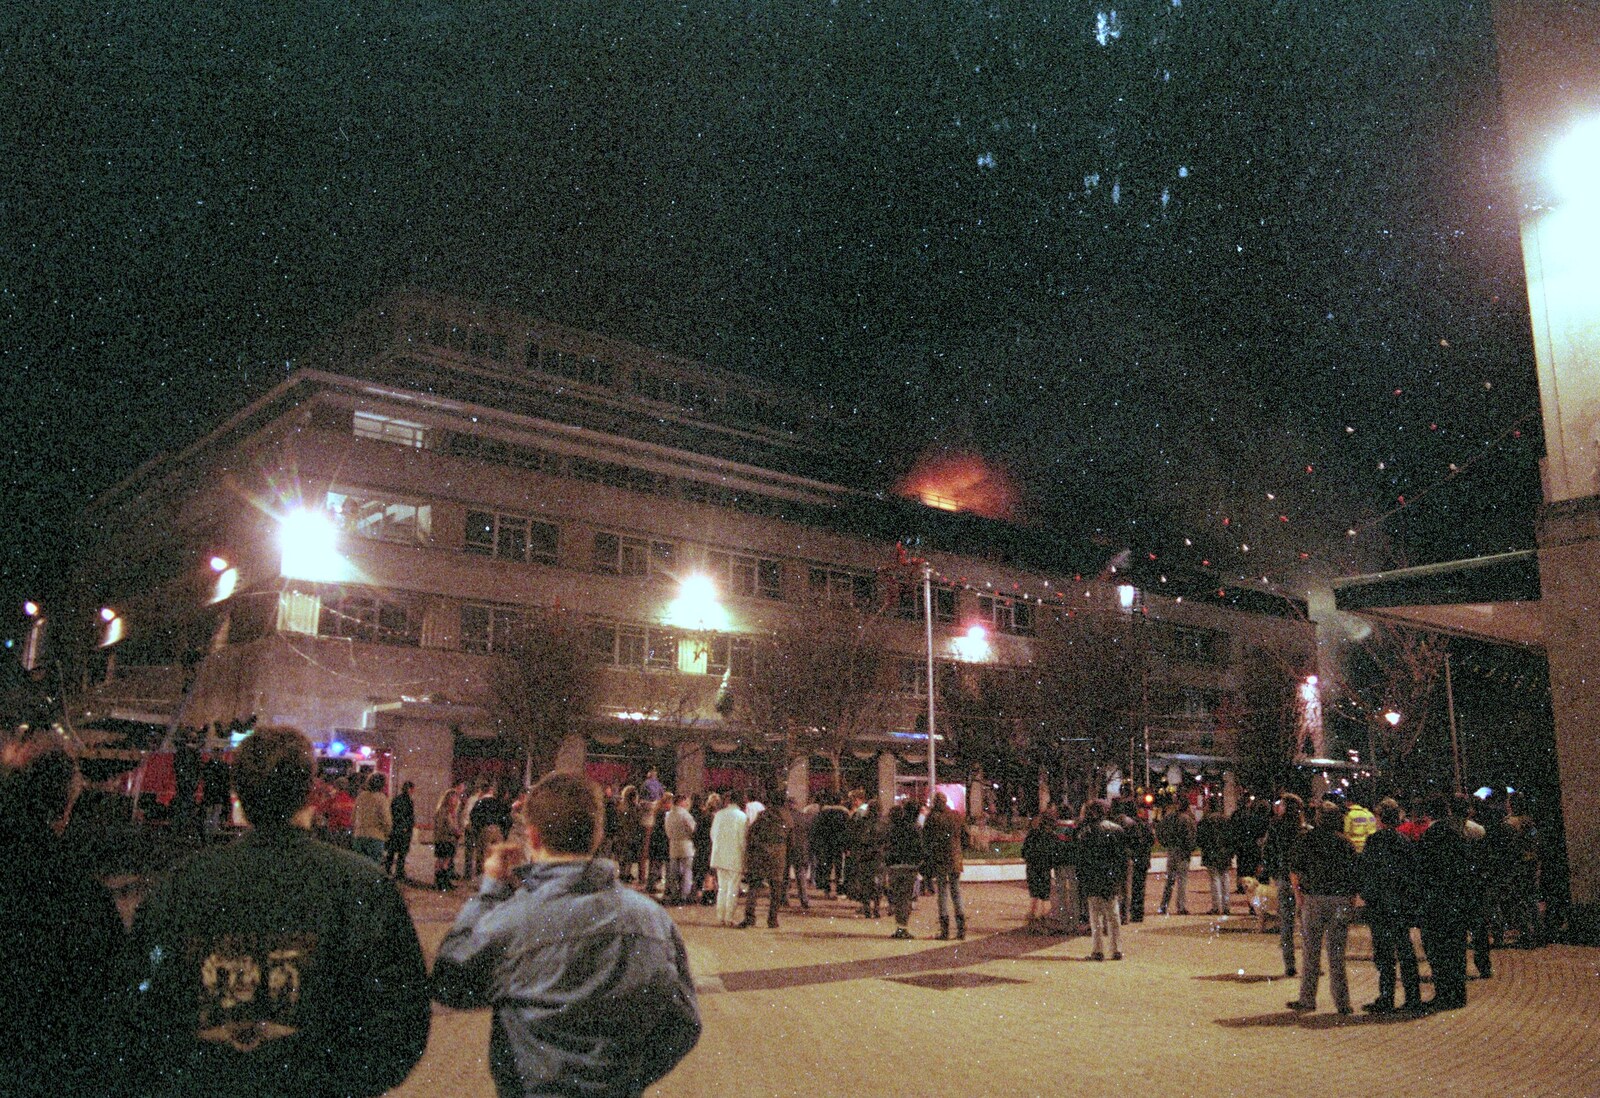 Nosher arrives as the fire is still quite small from Uni: The Fire-Bombing of Dingles, Plymouth, Devon - 19th December 1988